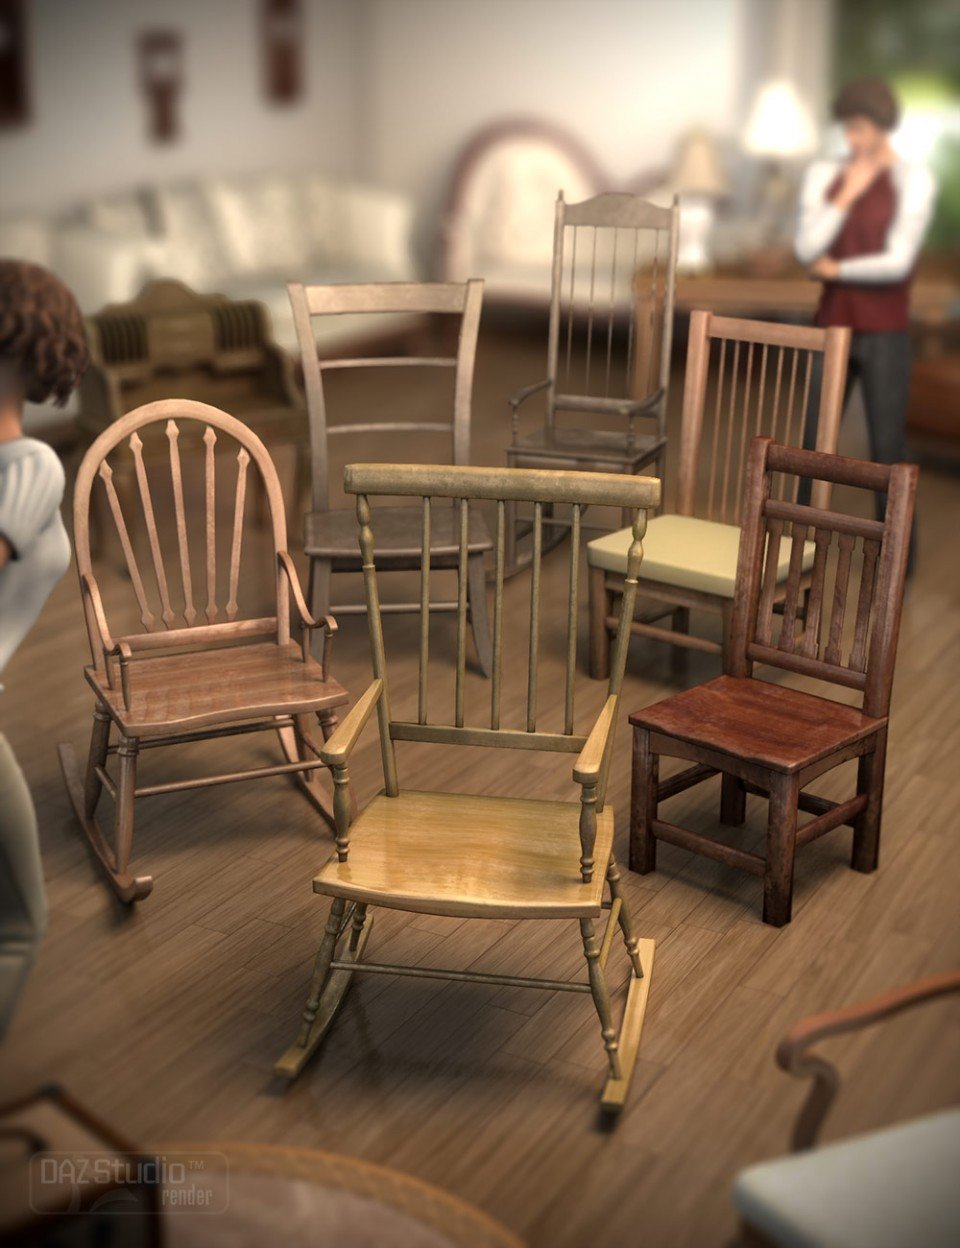 The Chair Collection_DAZ3DDL